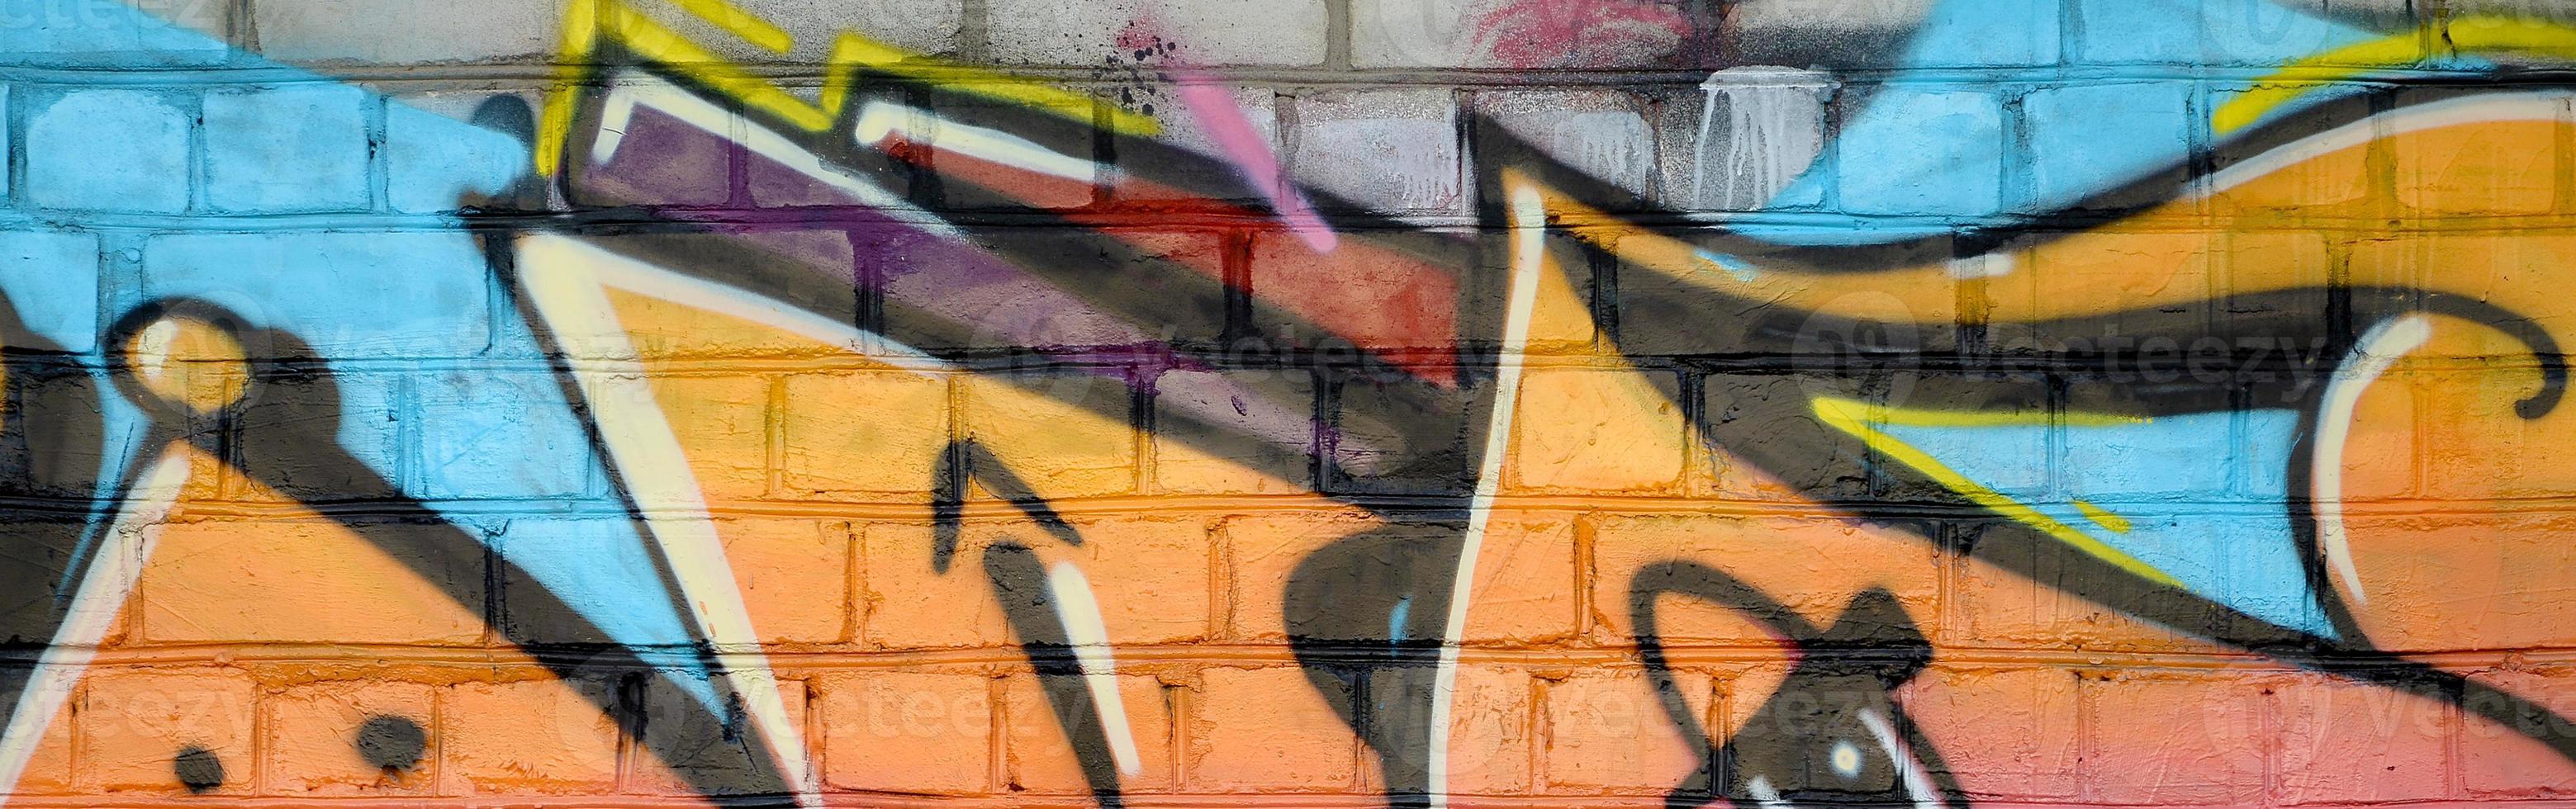 Abstract colorful fragment of graffiti paintings on old brick wall. Street-art composition with parts of wild letters and multicolored stains. Subcultural background texture photo